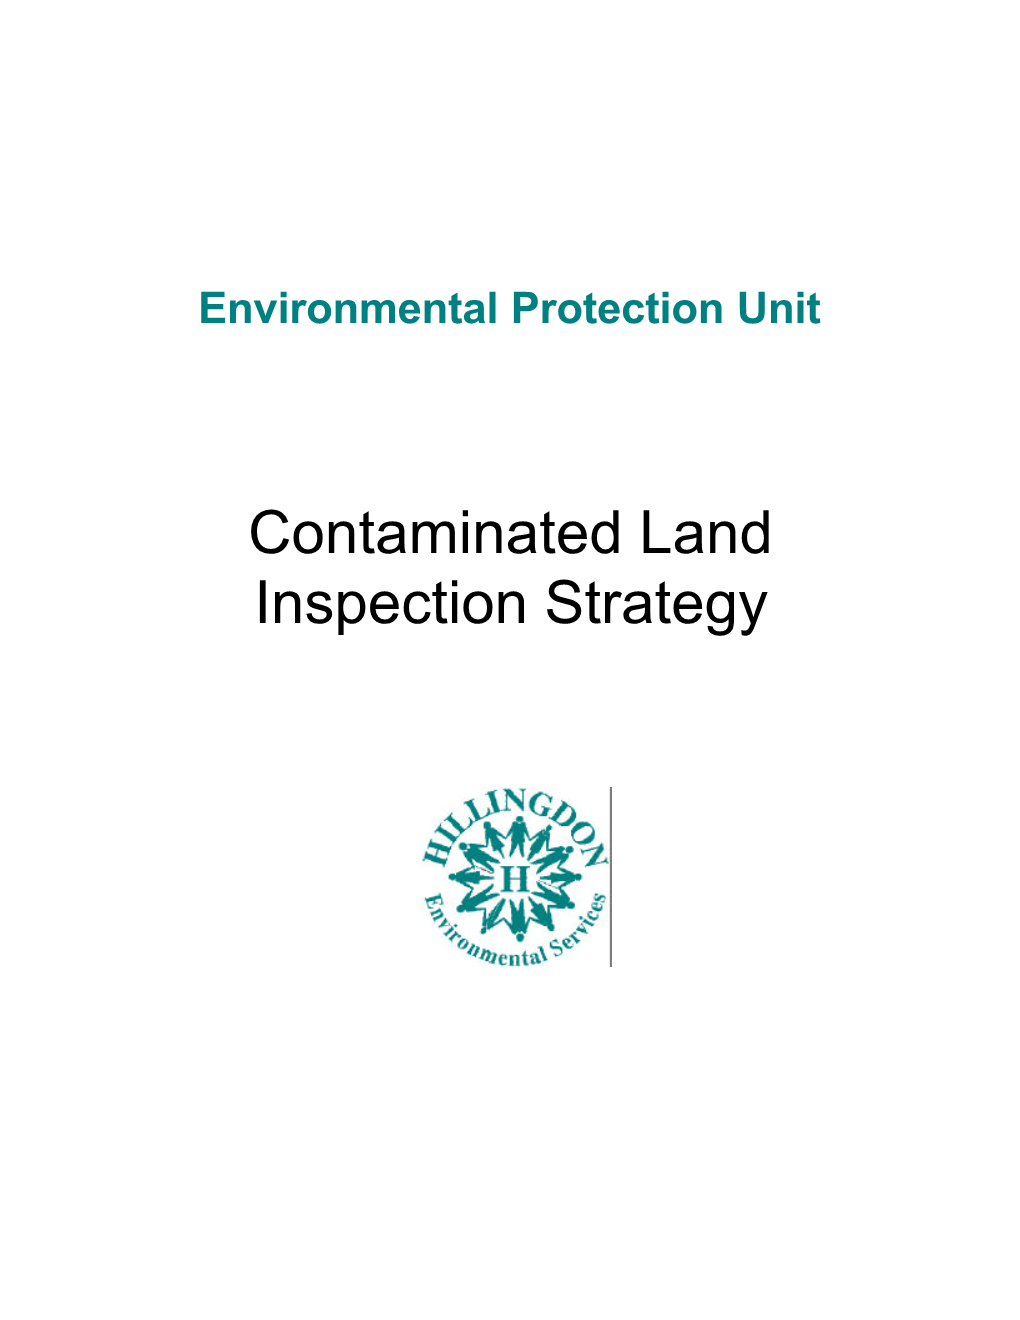 Contaminated Land Inspection Strategy London Borough of Hillingdon Contaminated Land Inspection Strategy, 2001